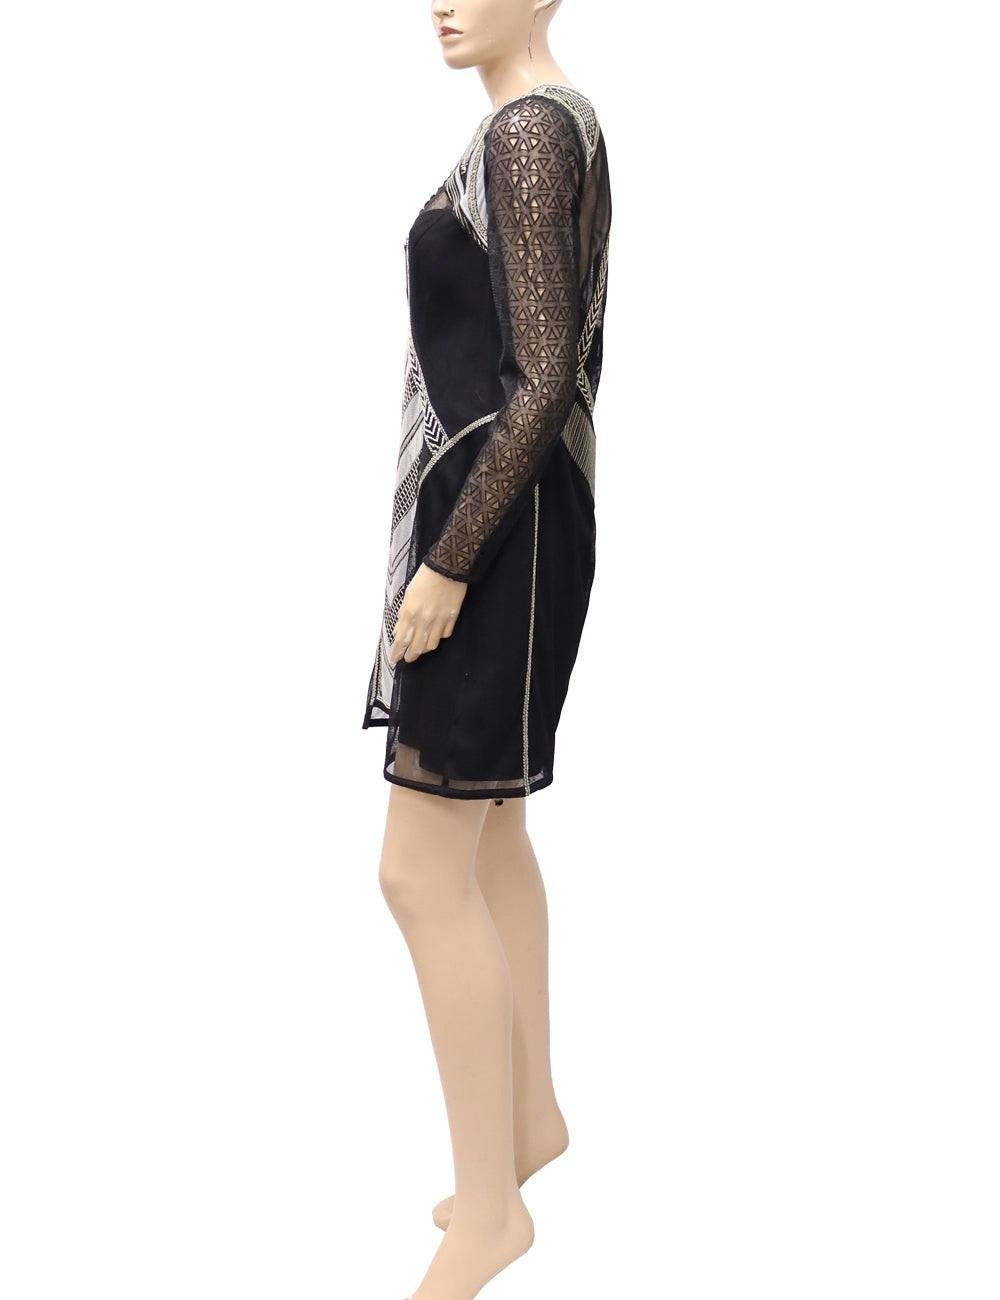 Karen Millen Black Mesh Beaded Mini Cut-out Dress.
Additional information:
Material: Polyester
Size: UK 14
Condition: Good
